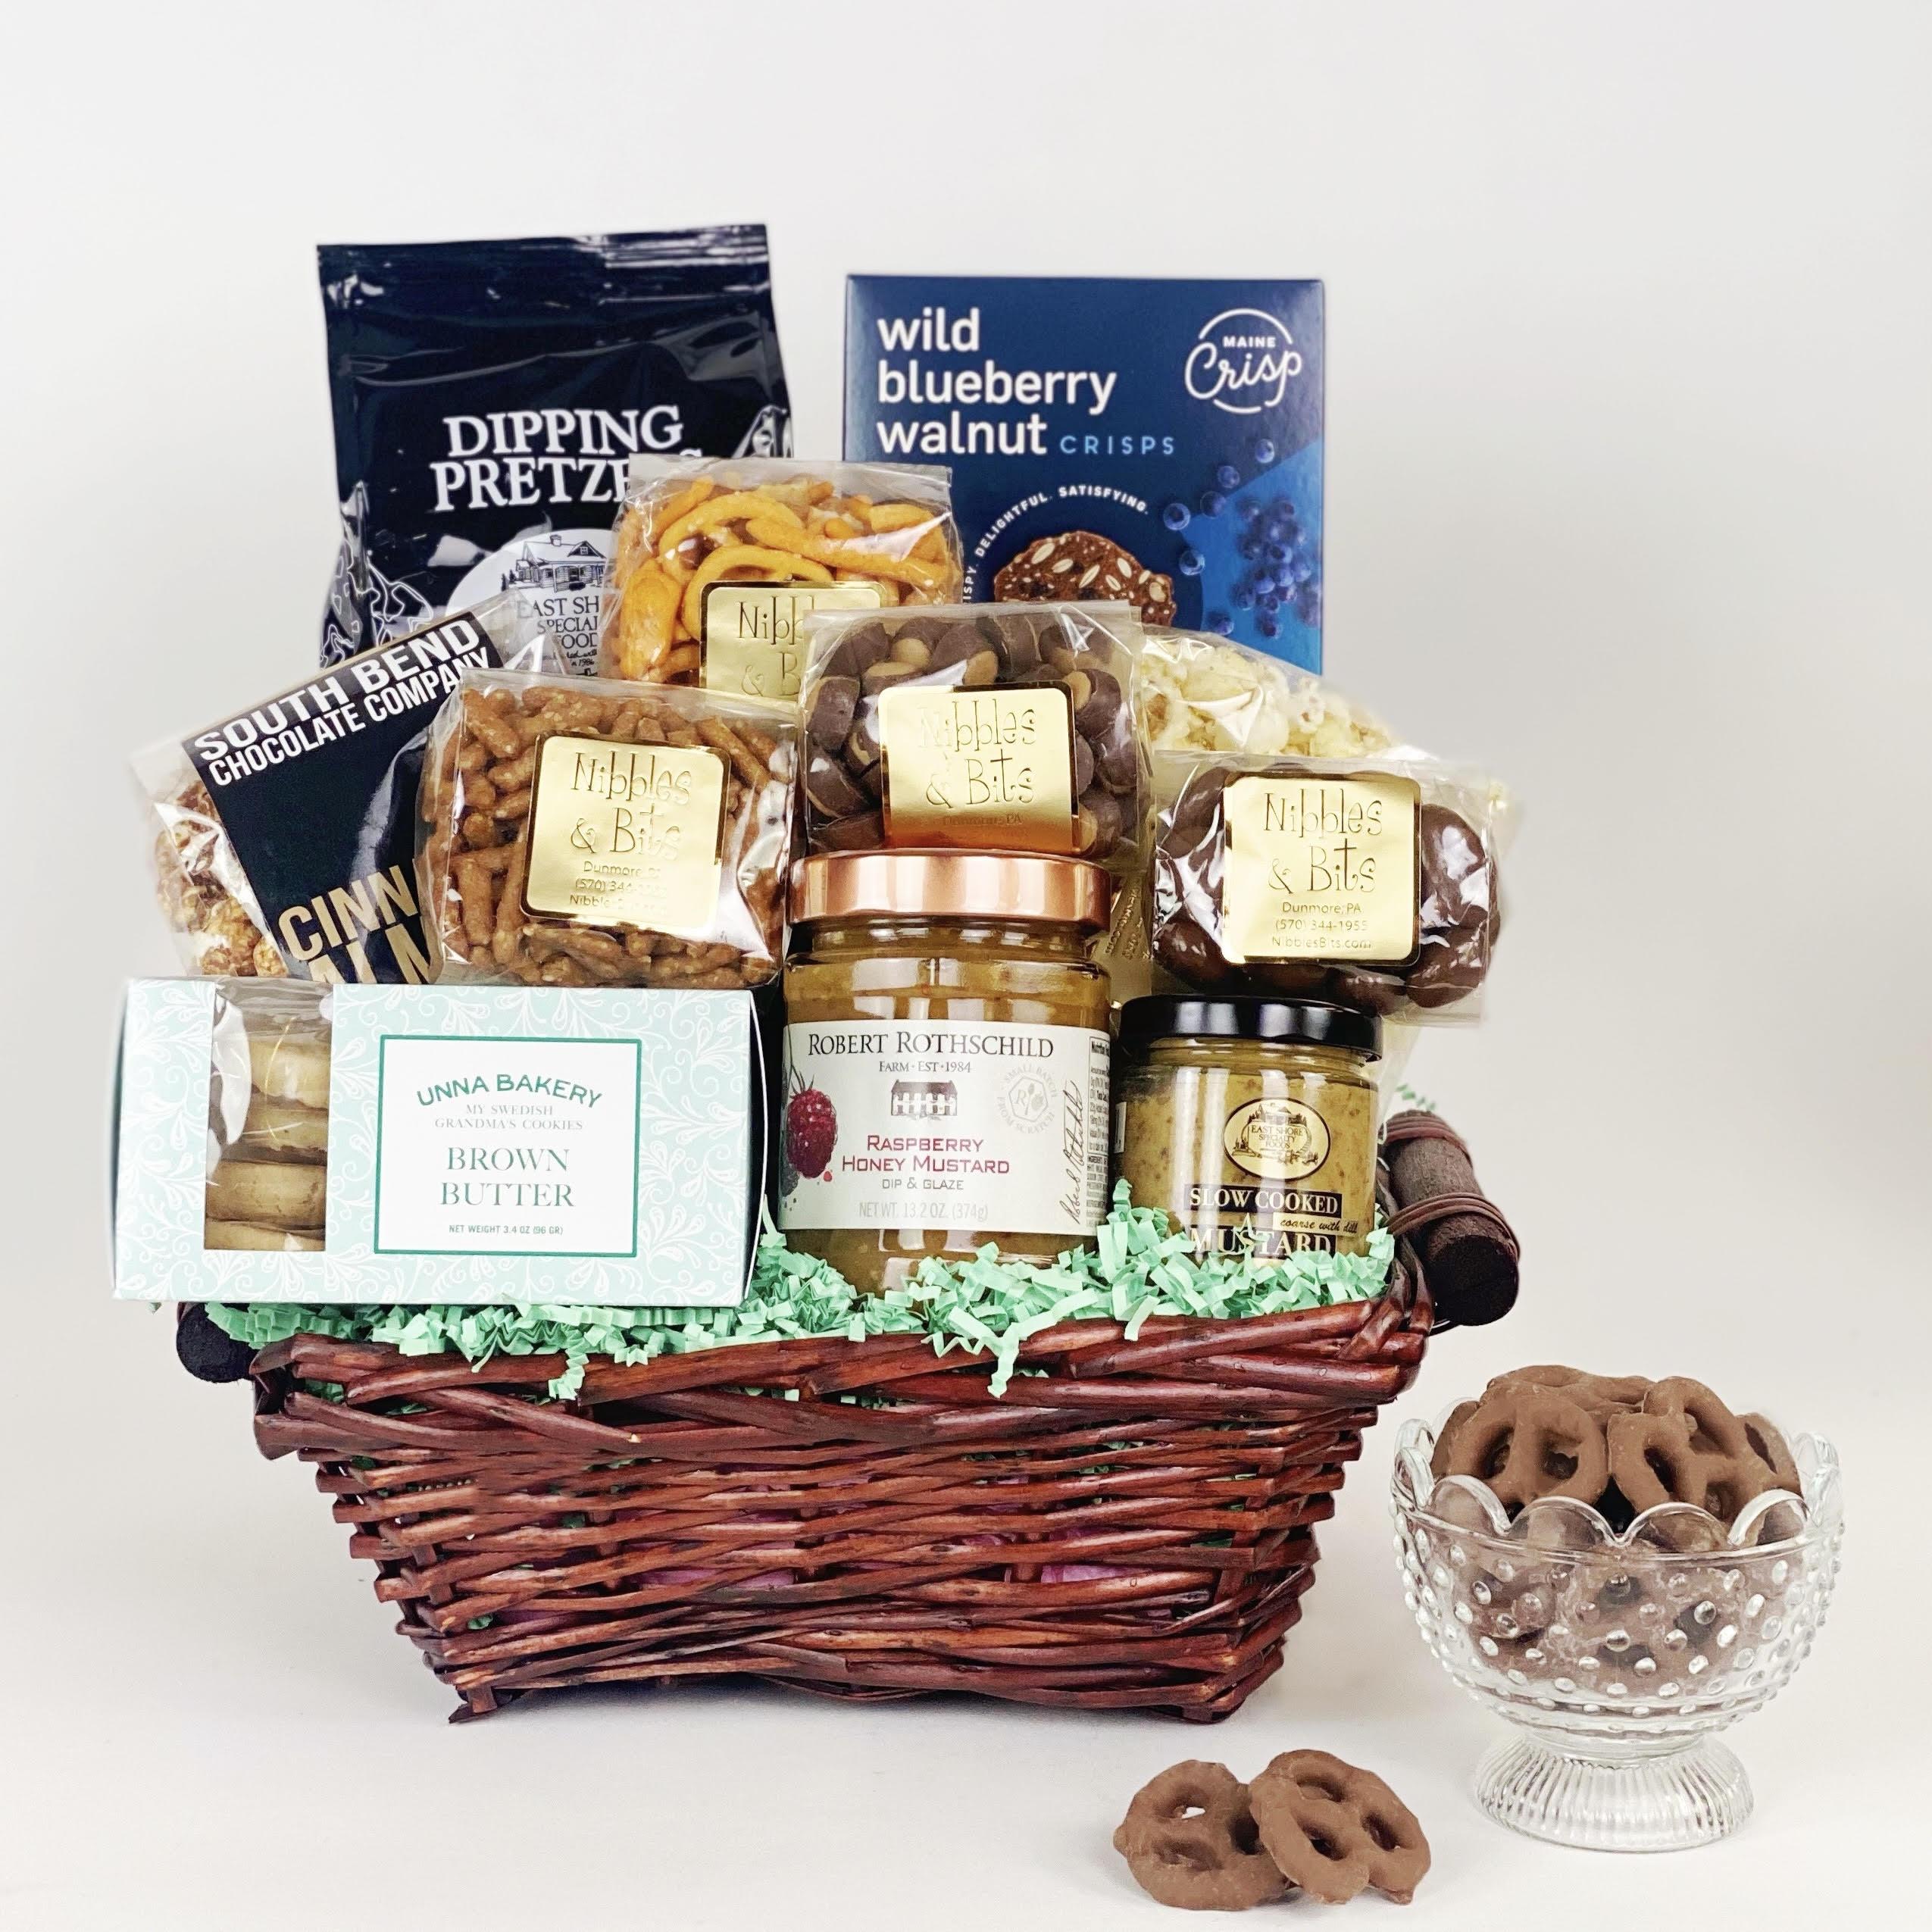 Happy Birthday Gift Basket   – Aunt Laurie's